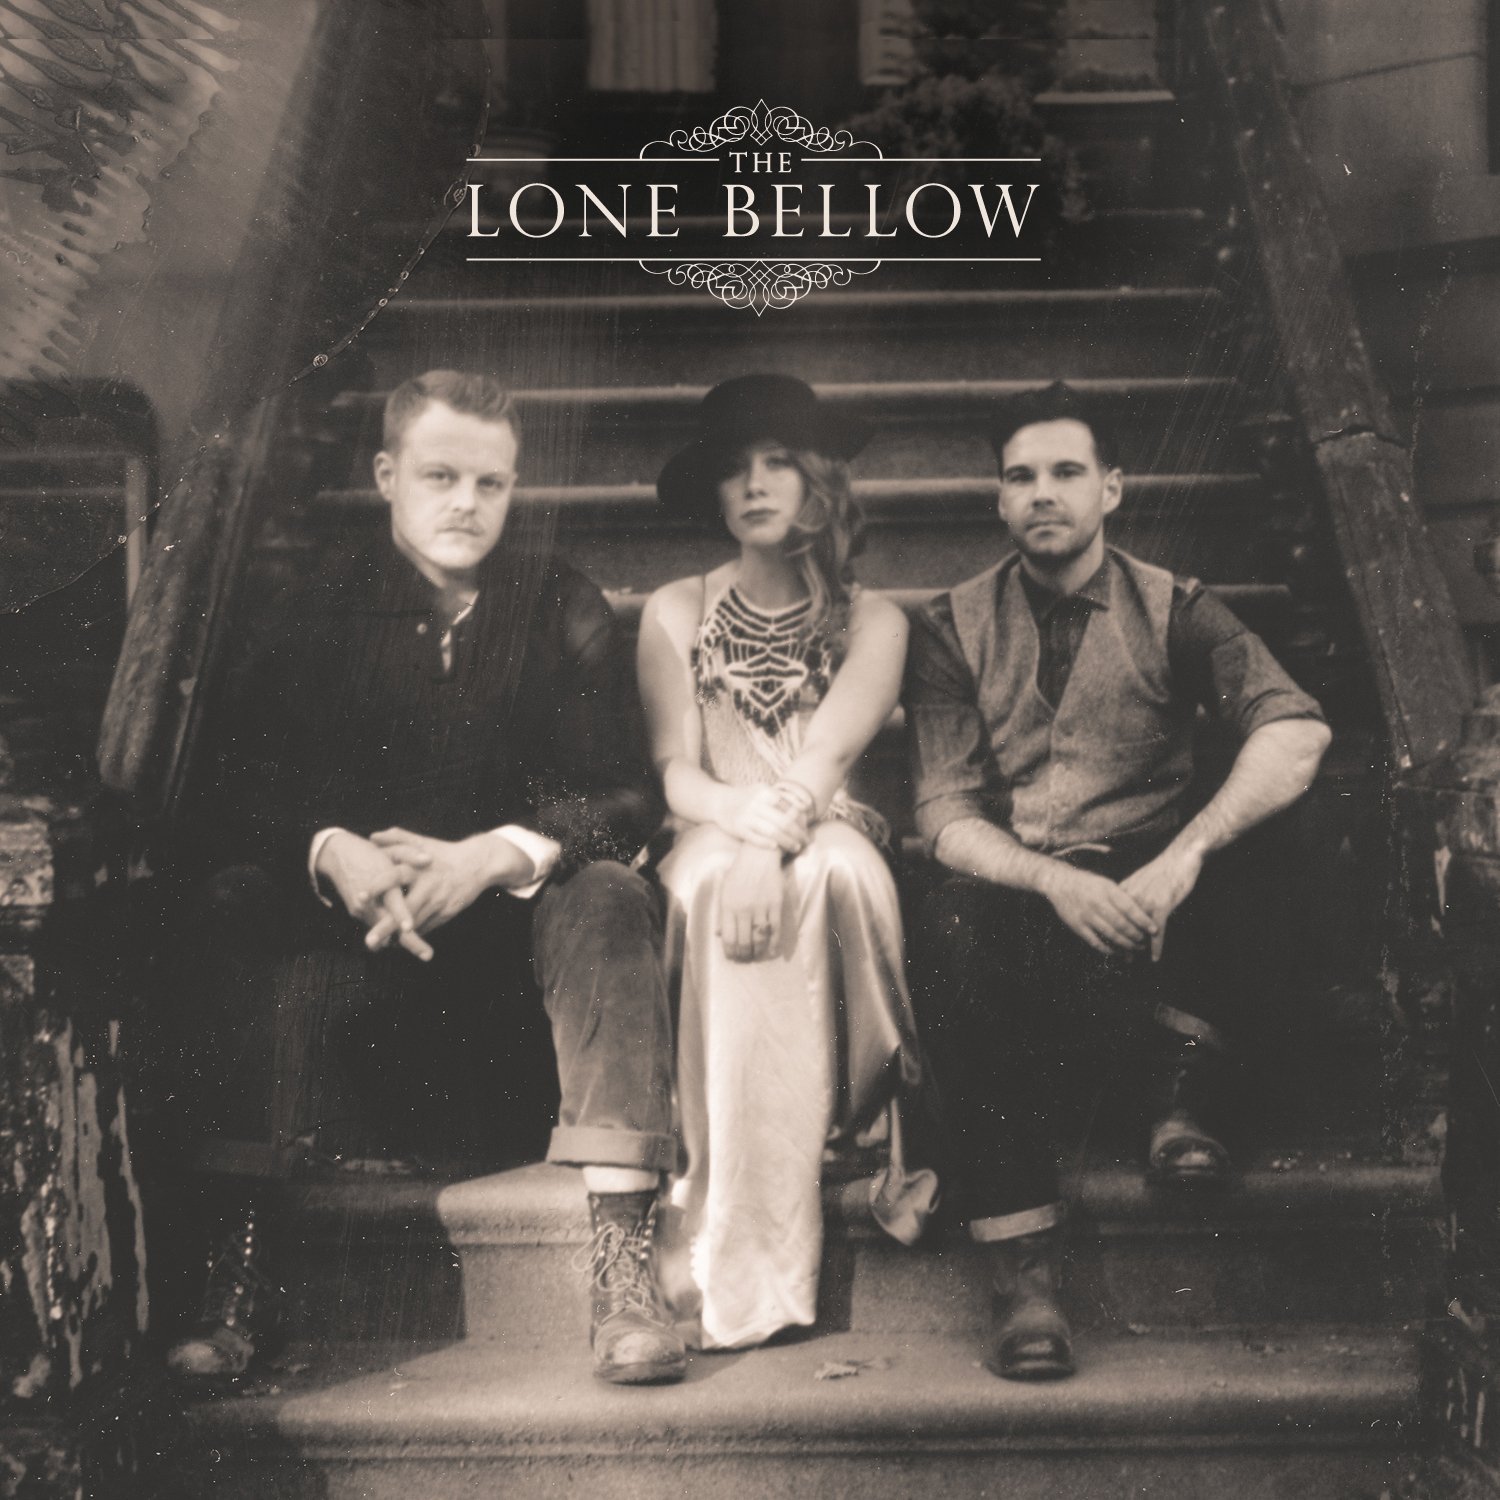 THE LONE BELLOW – The Lone Bellow